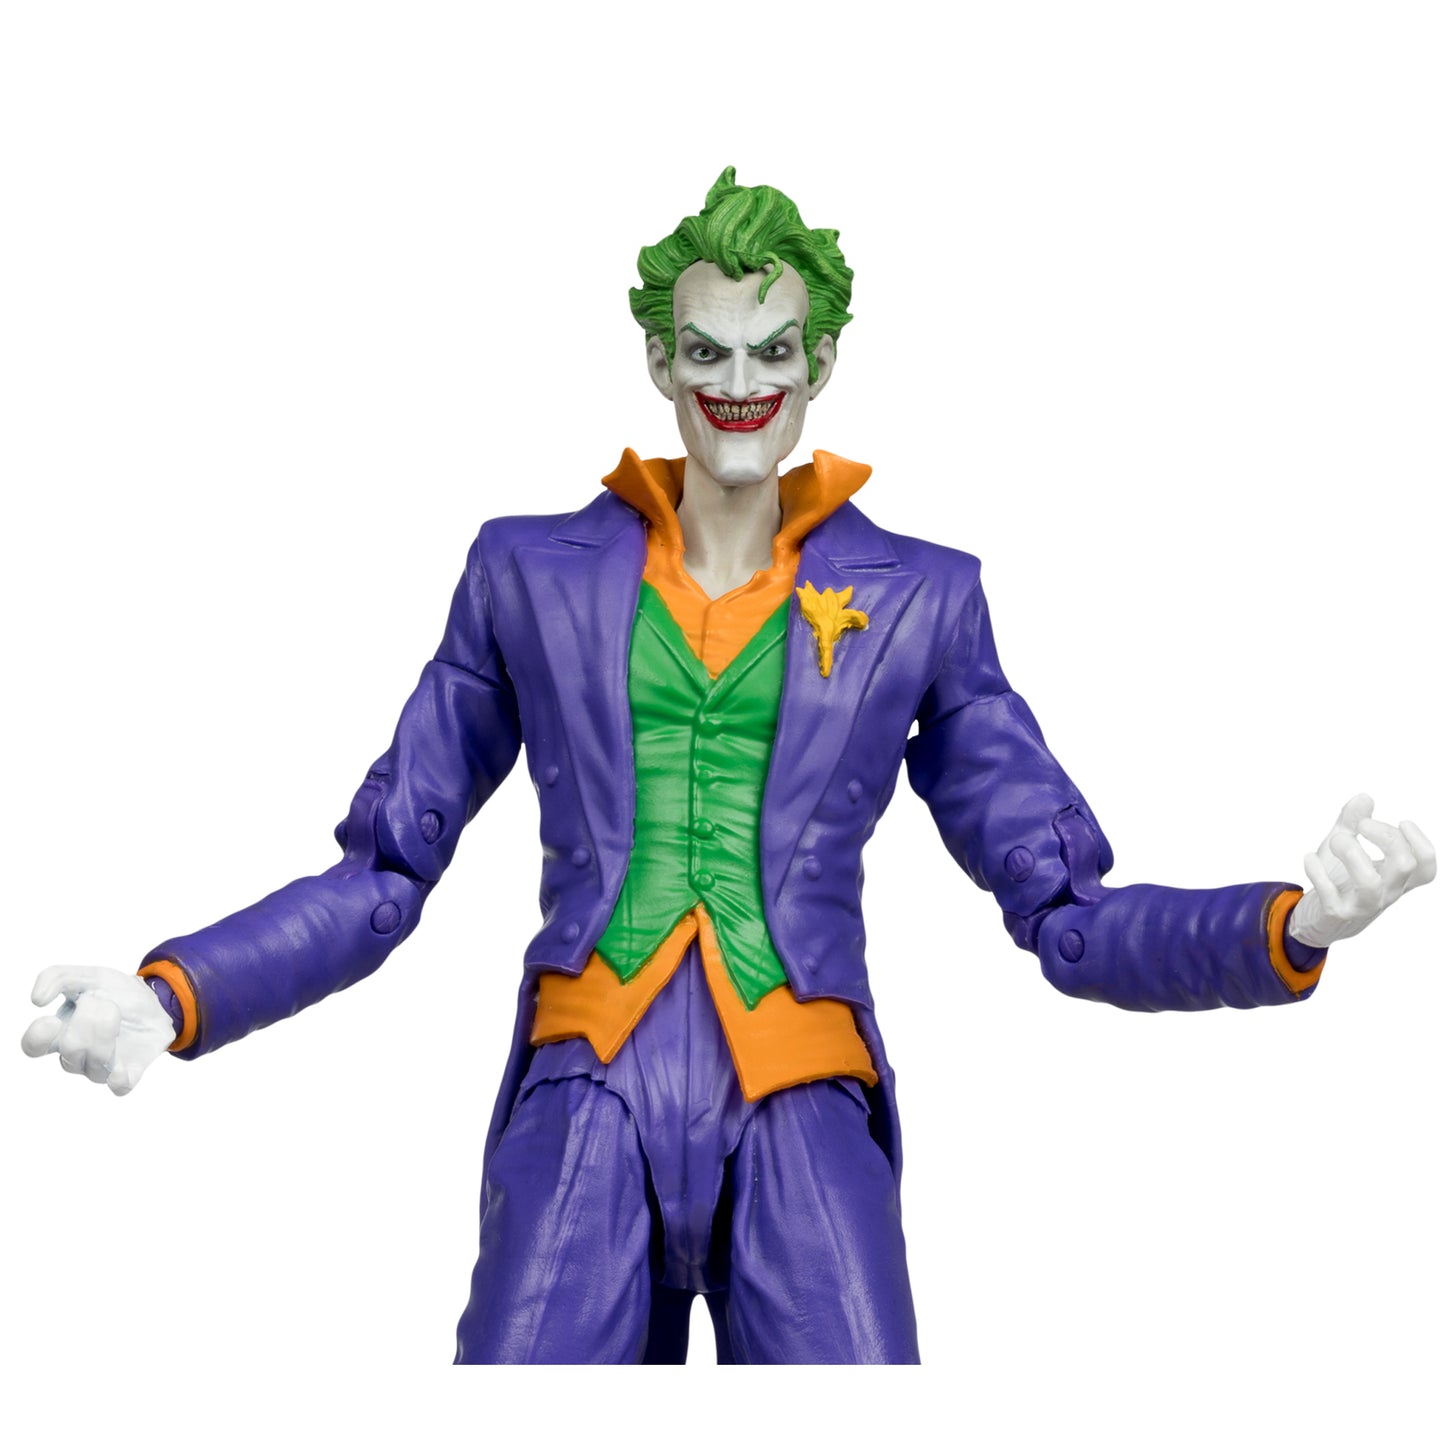 (Preorder) DC Multiverse The Joker and Punchline 7-Inch Action Figure 2-Pack